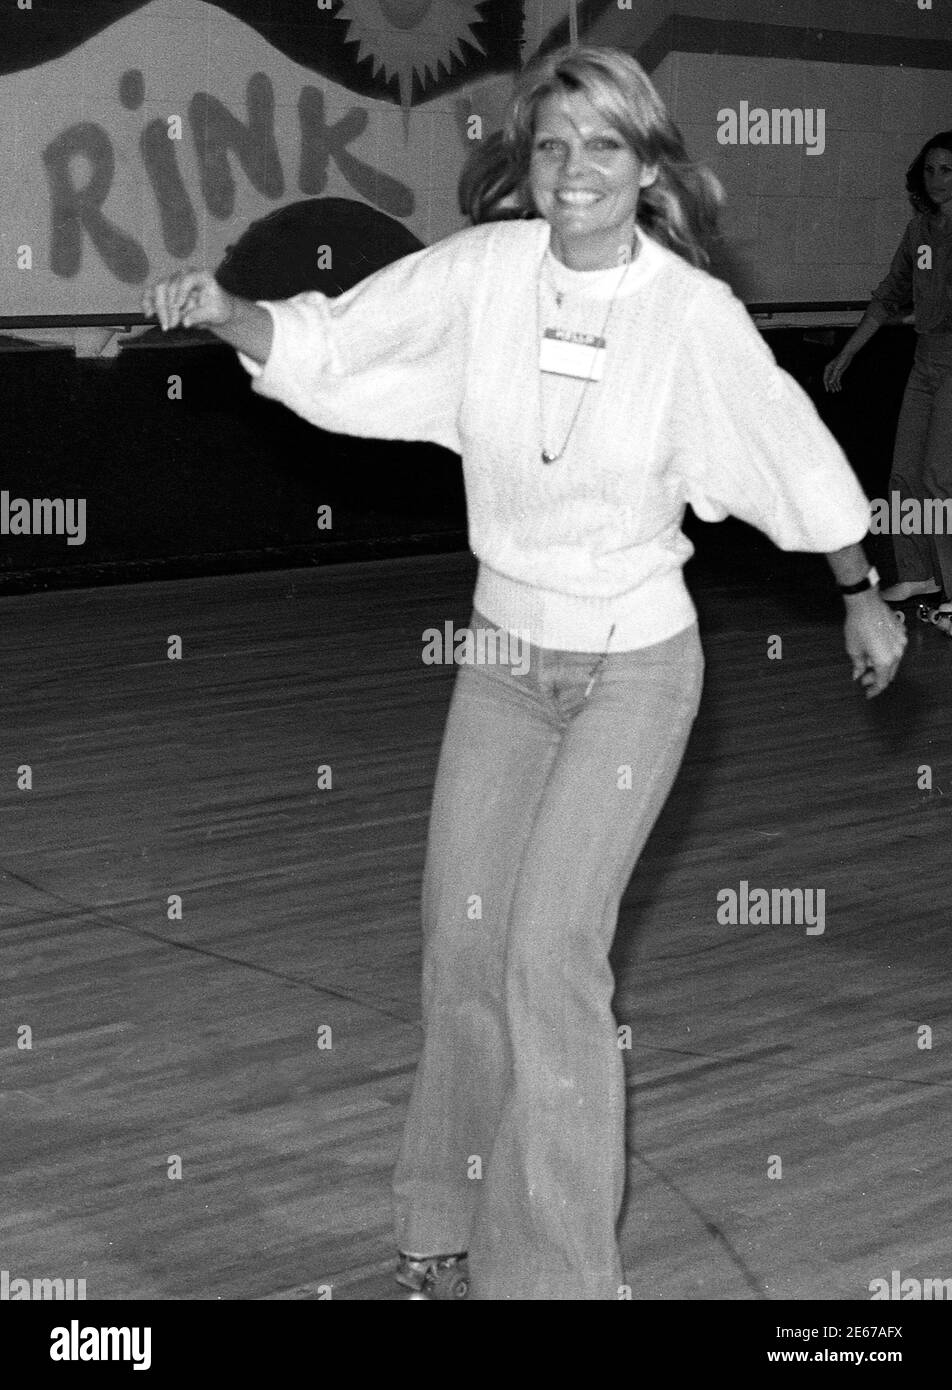 Cathy Lee Crosby all'evento Flippers era, 1978 Foto Stock